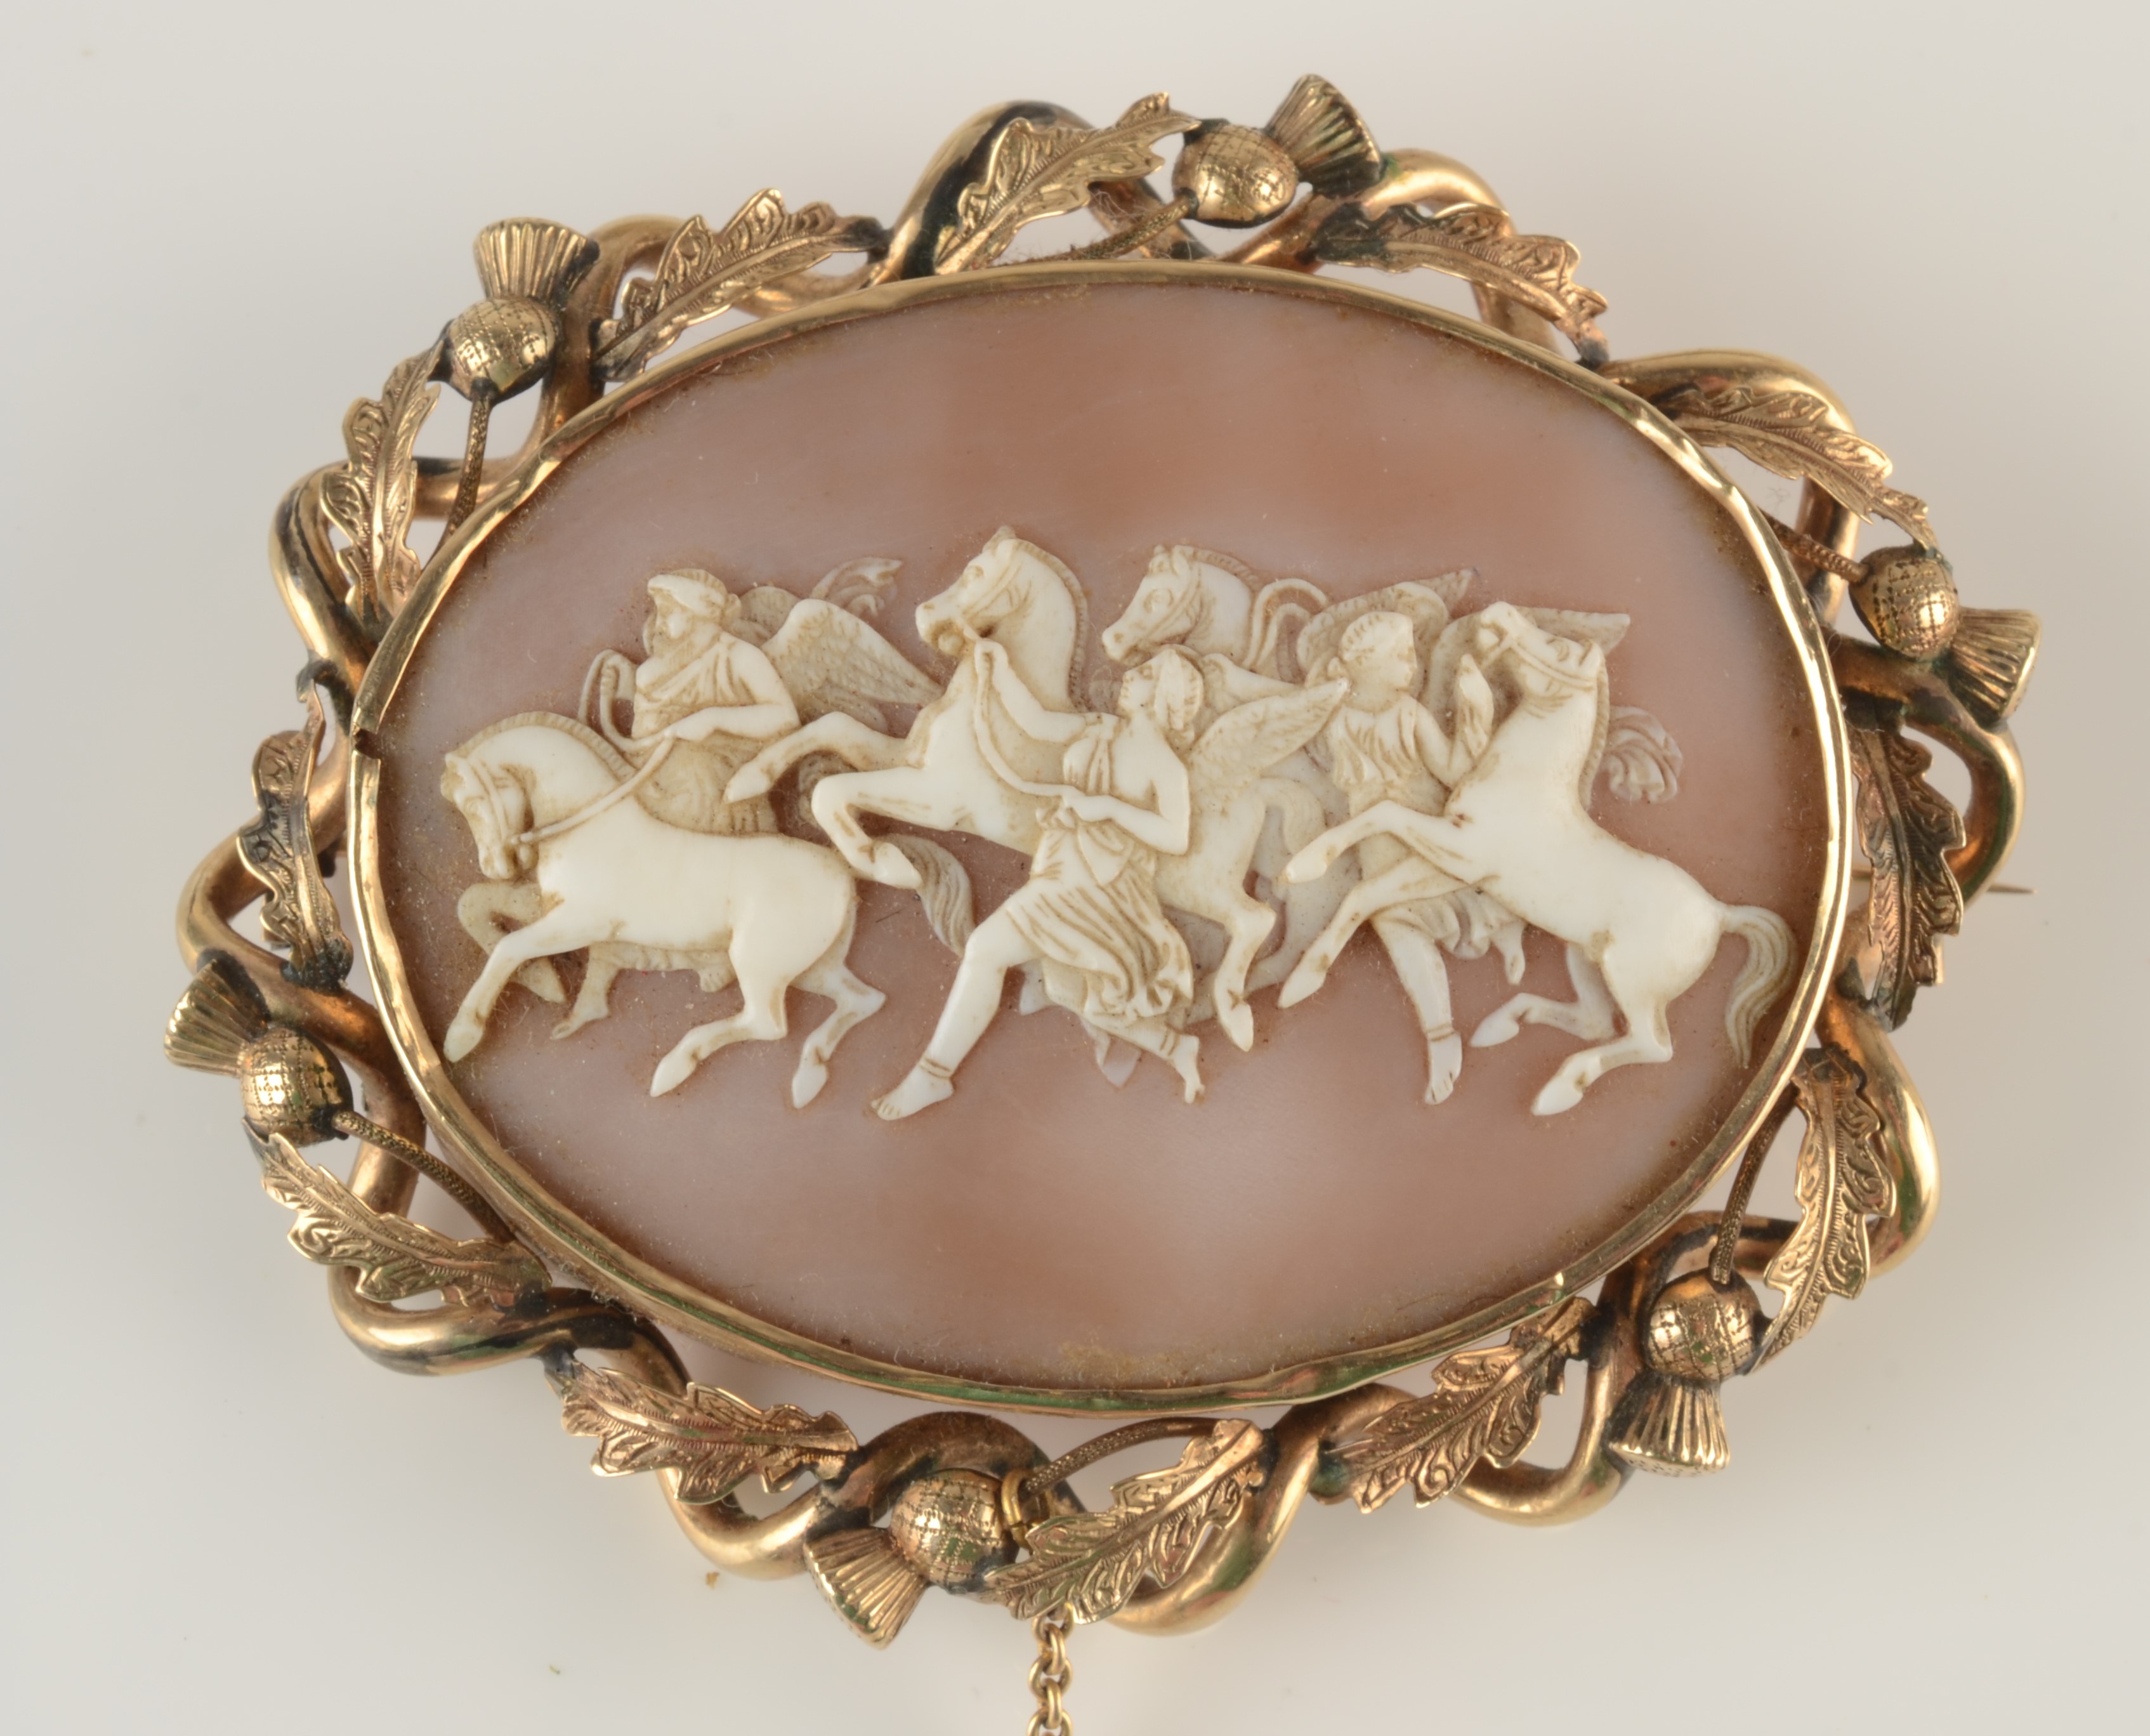 A 19th century large oval cameo brooch showing wild horses and mythical figures in a gold thistle